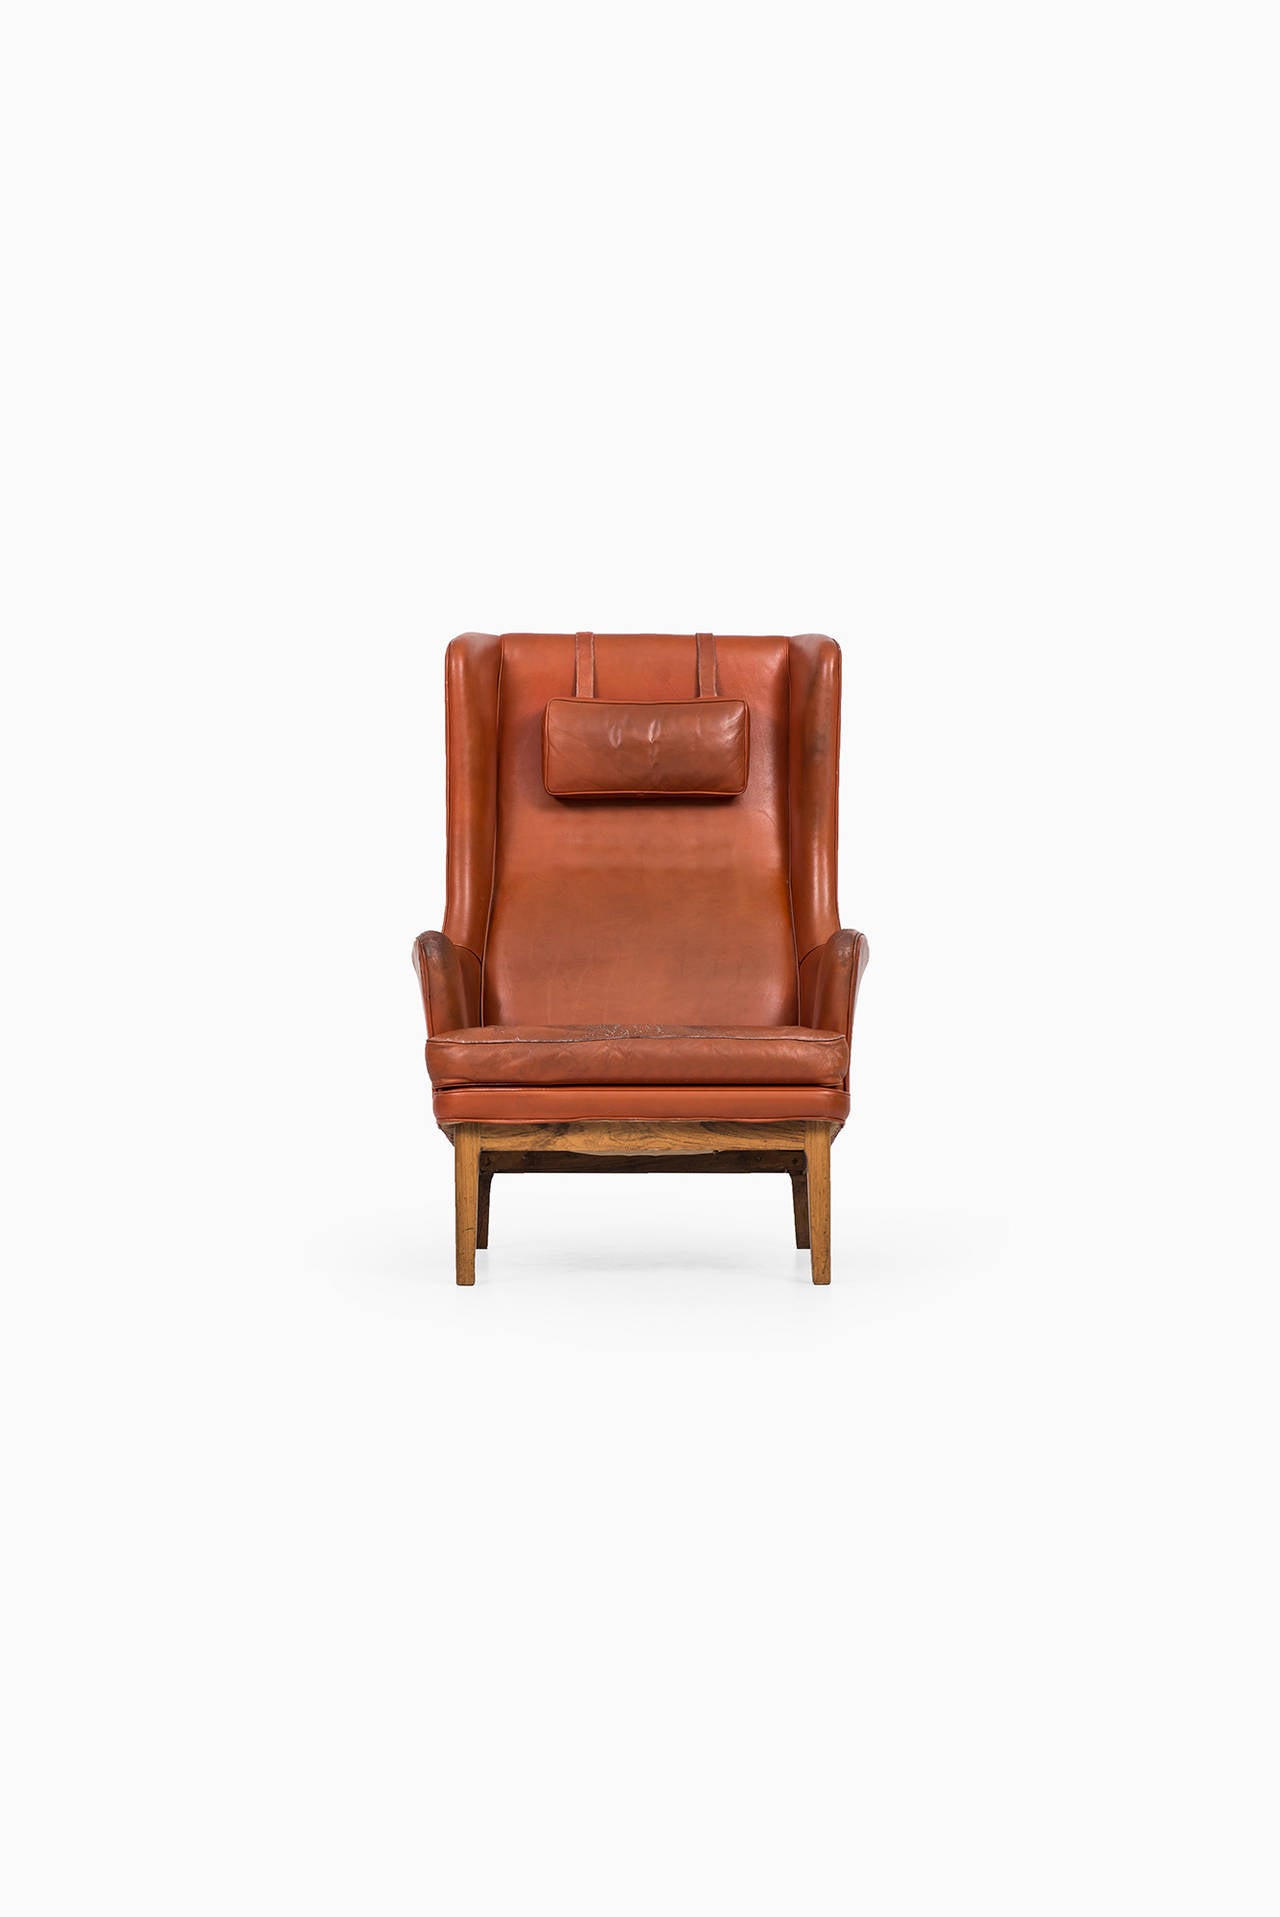 Arne Norell wingback easy chair in rosewood and leather by Norell AB in Sweden 1